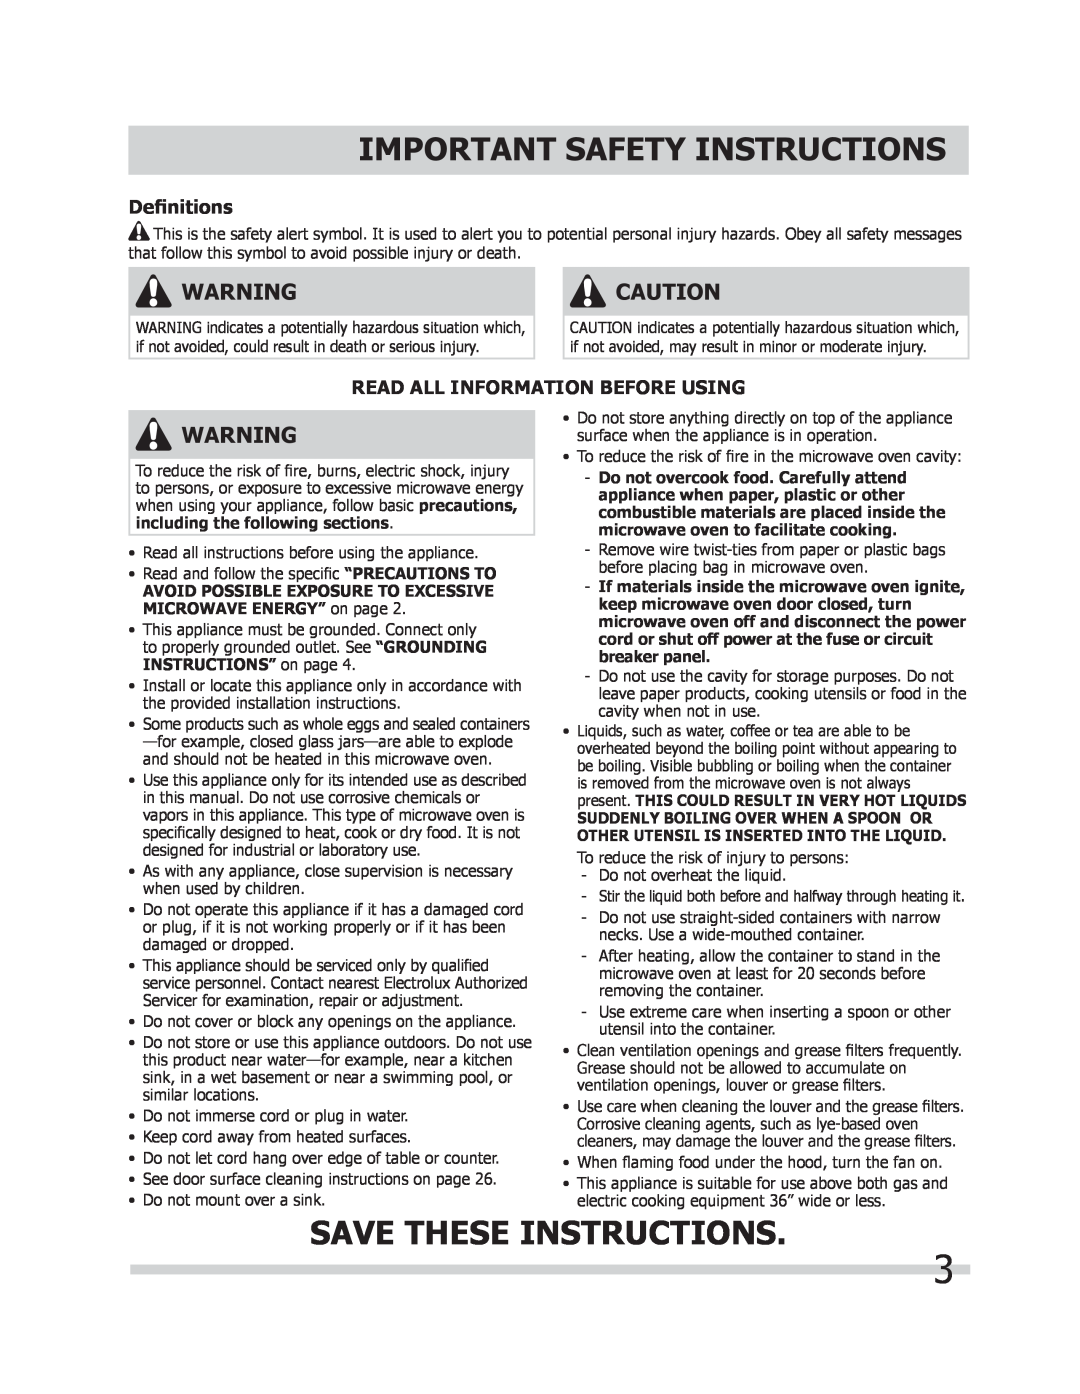 Frigidaire FGMV205KB Save These Instructions, Deﬁnitions, Read All Information Before Using, Important Safety Instructions 